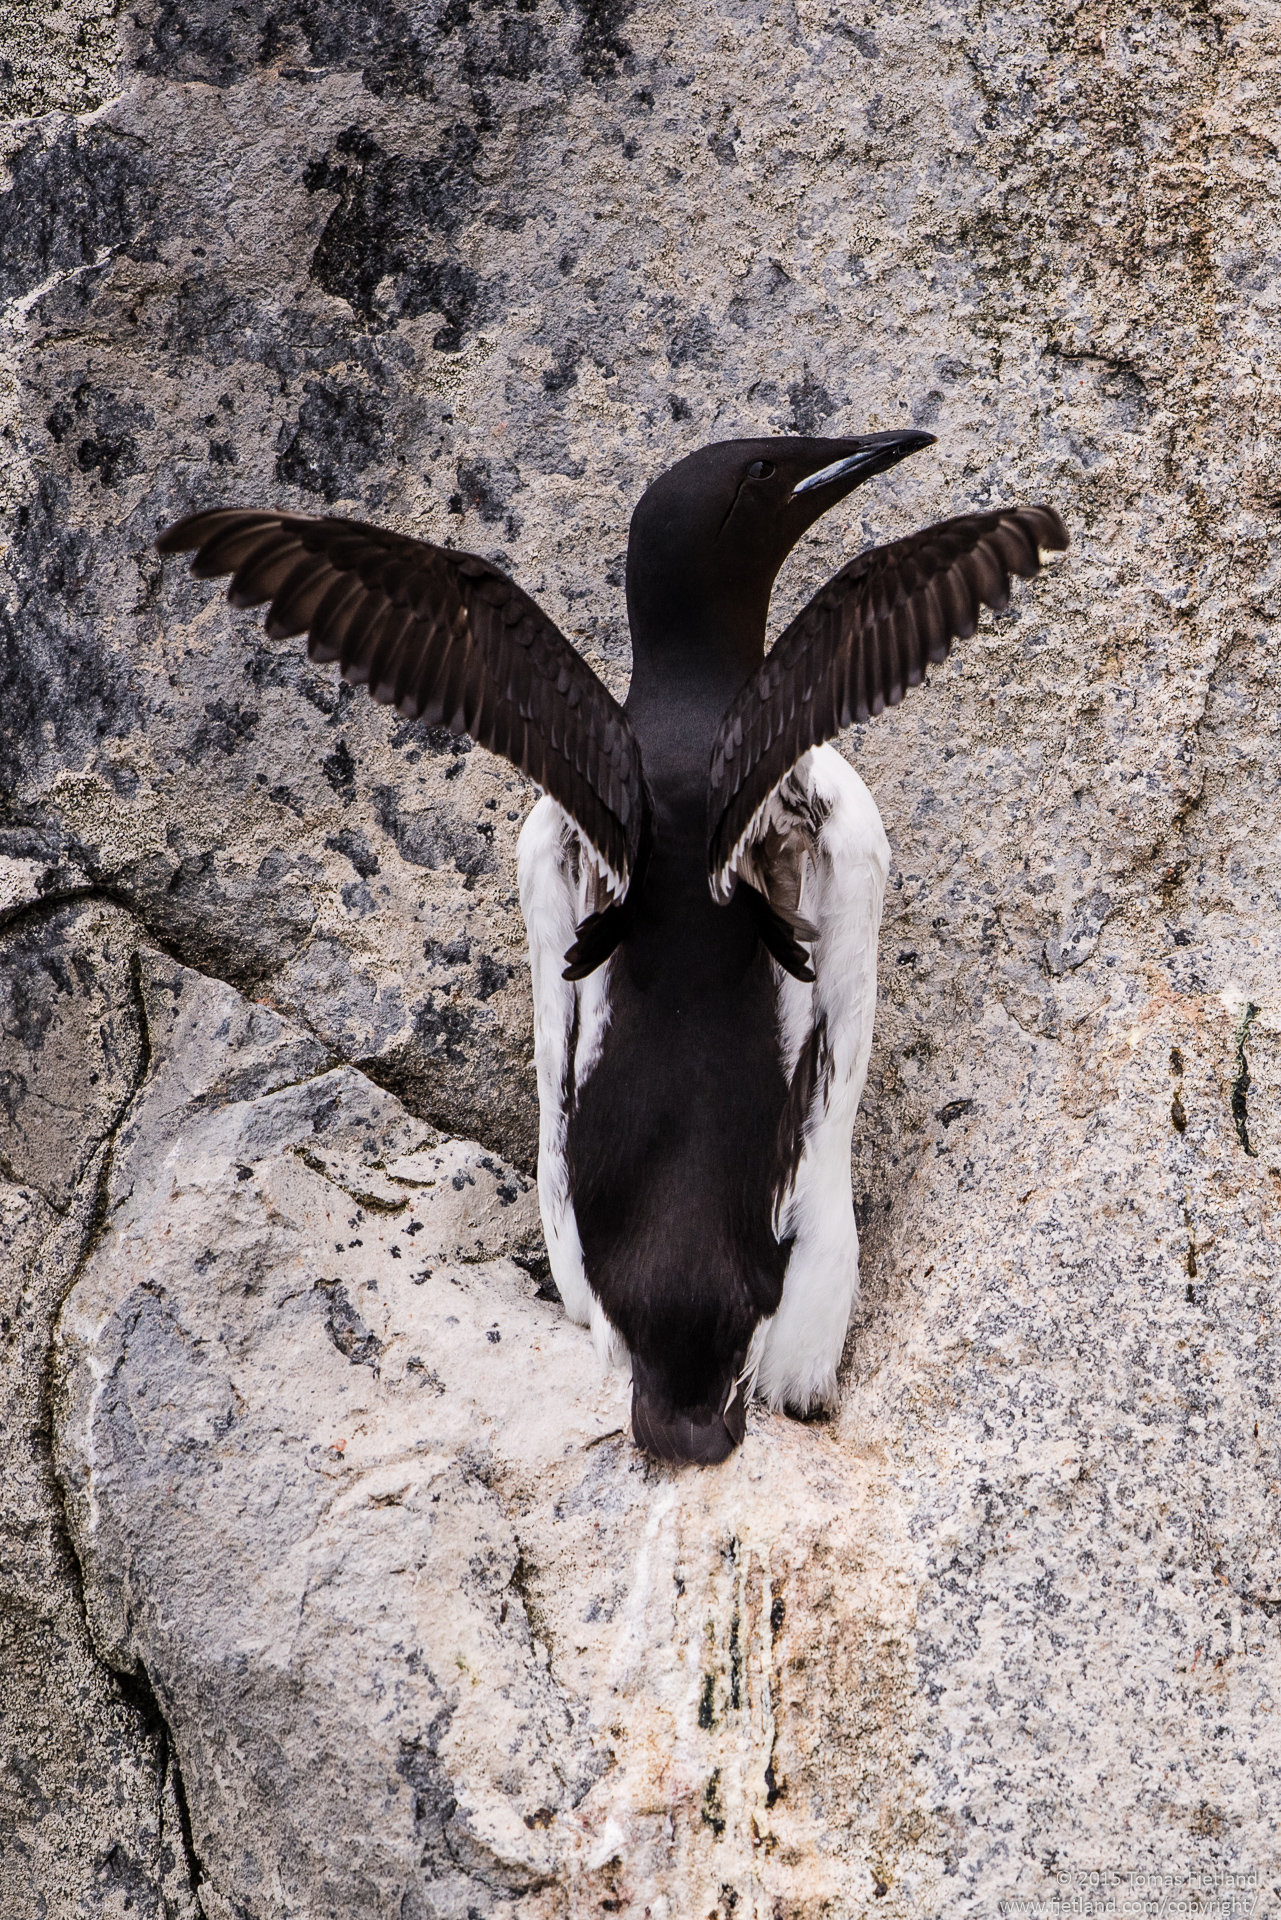 Brünnich's guillemot trying to fit into the last unclaimed dent in the cliffside